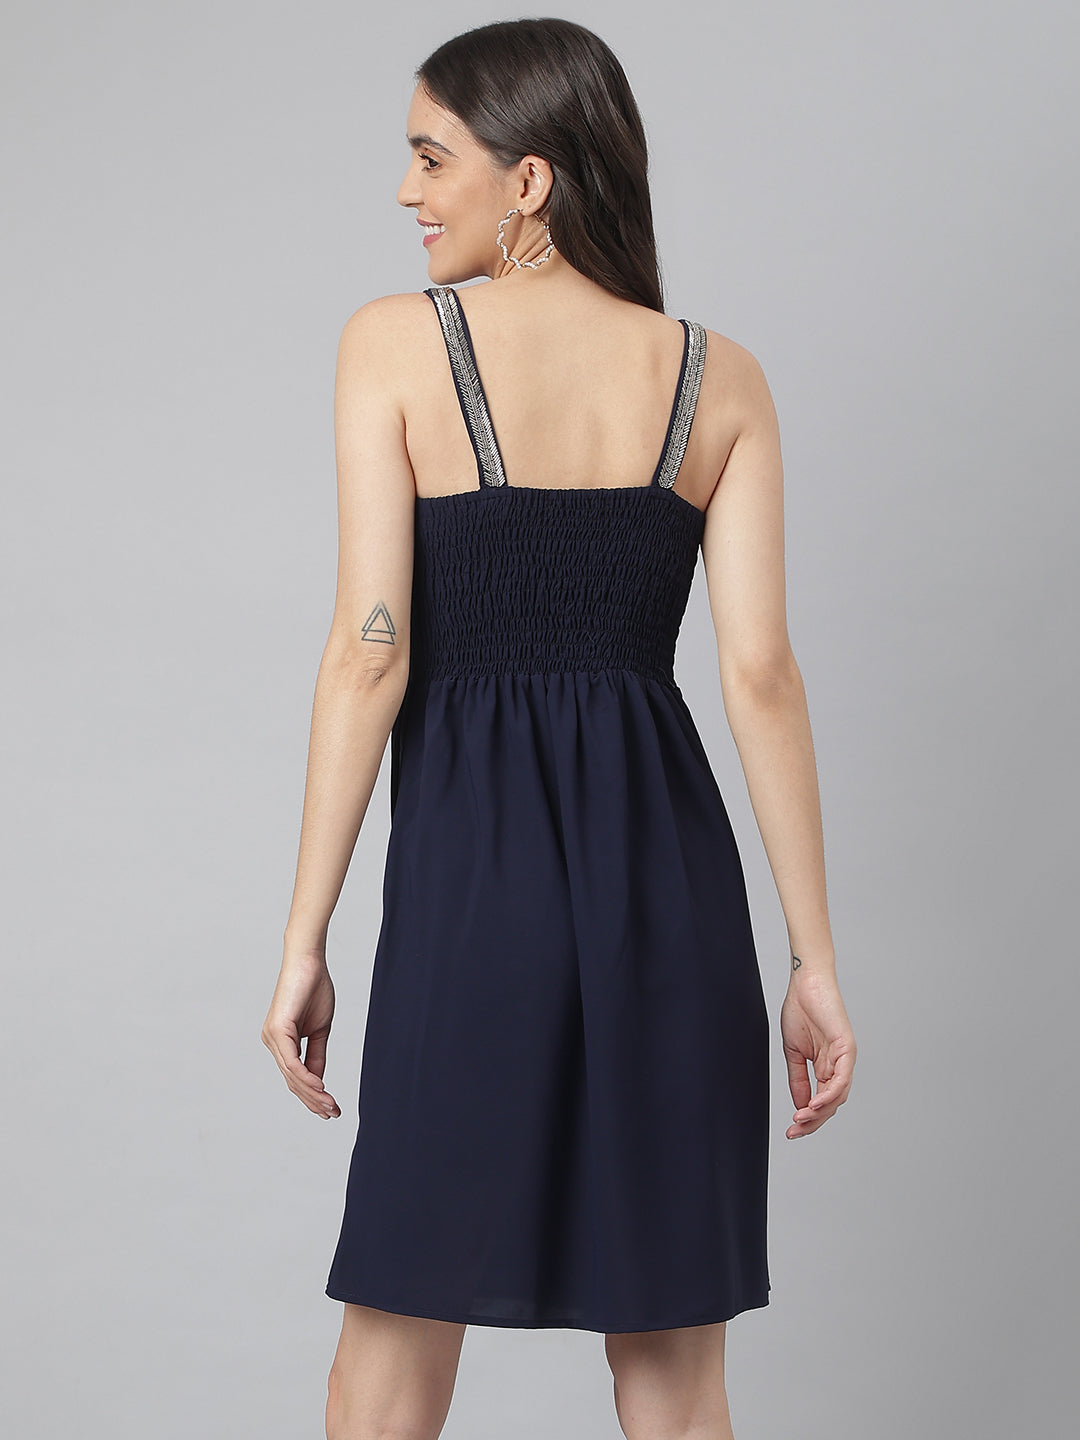 99463 - Navy Evening Wear Party Dress With Embroidered Straps